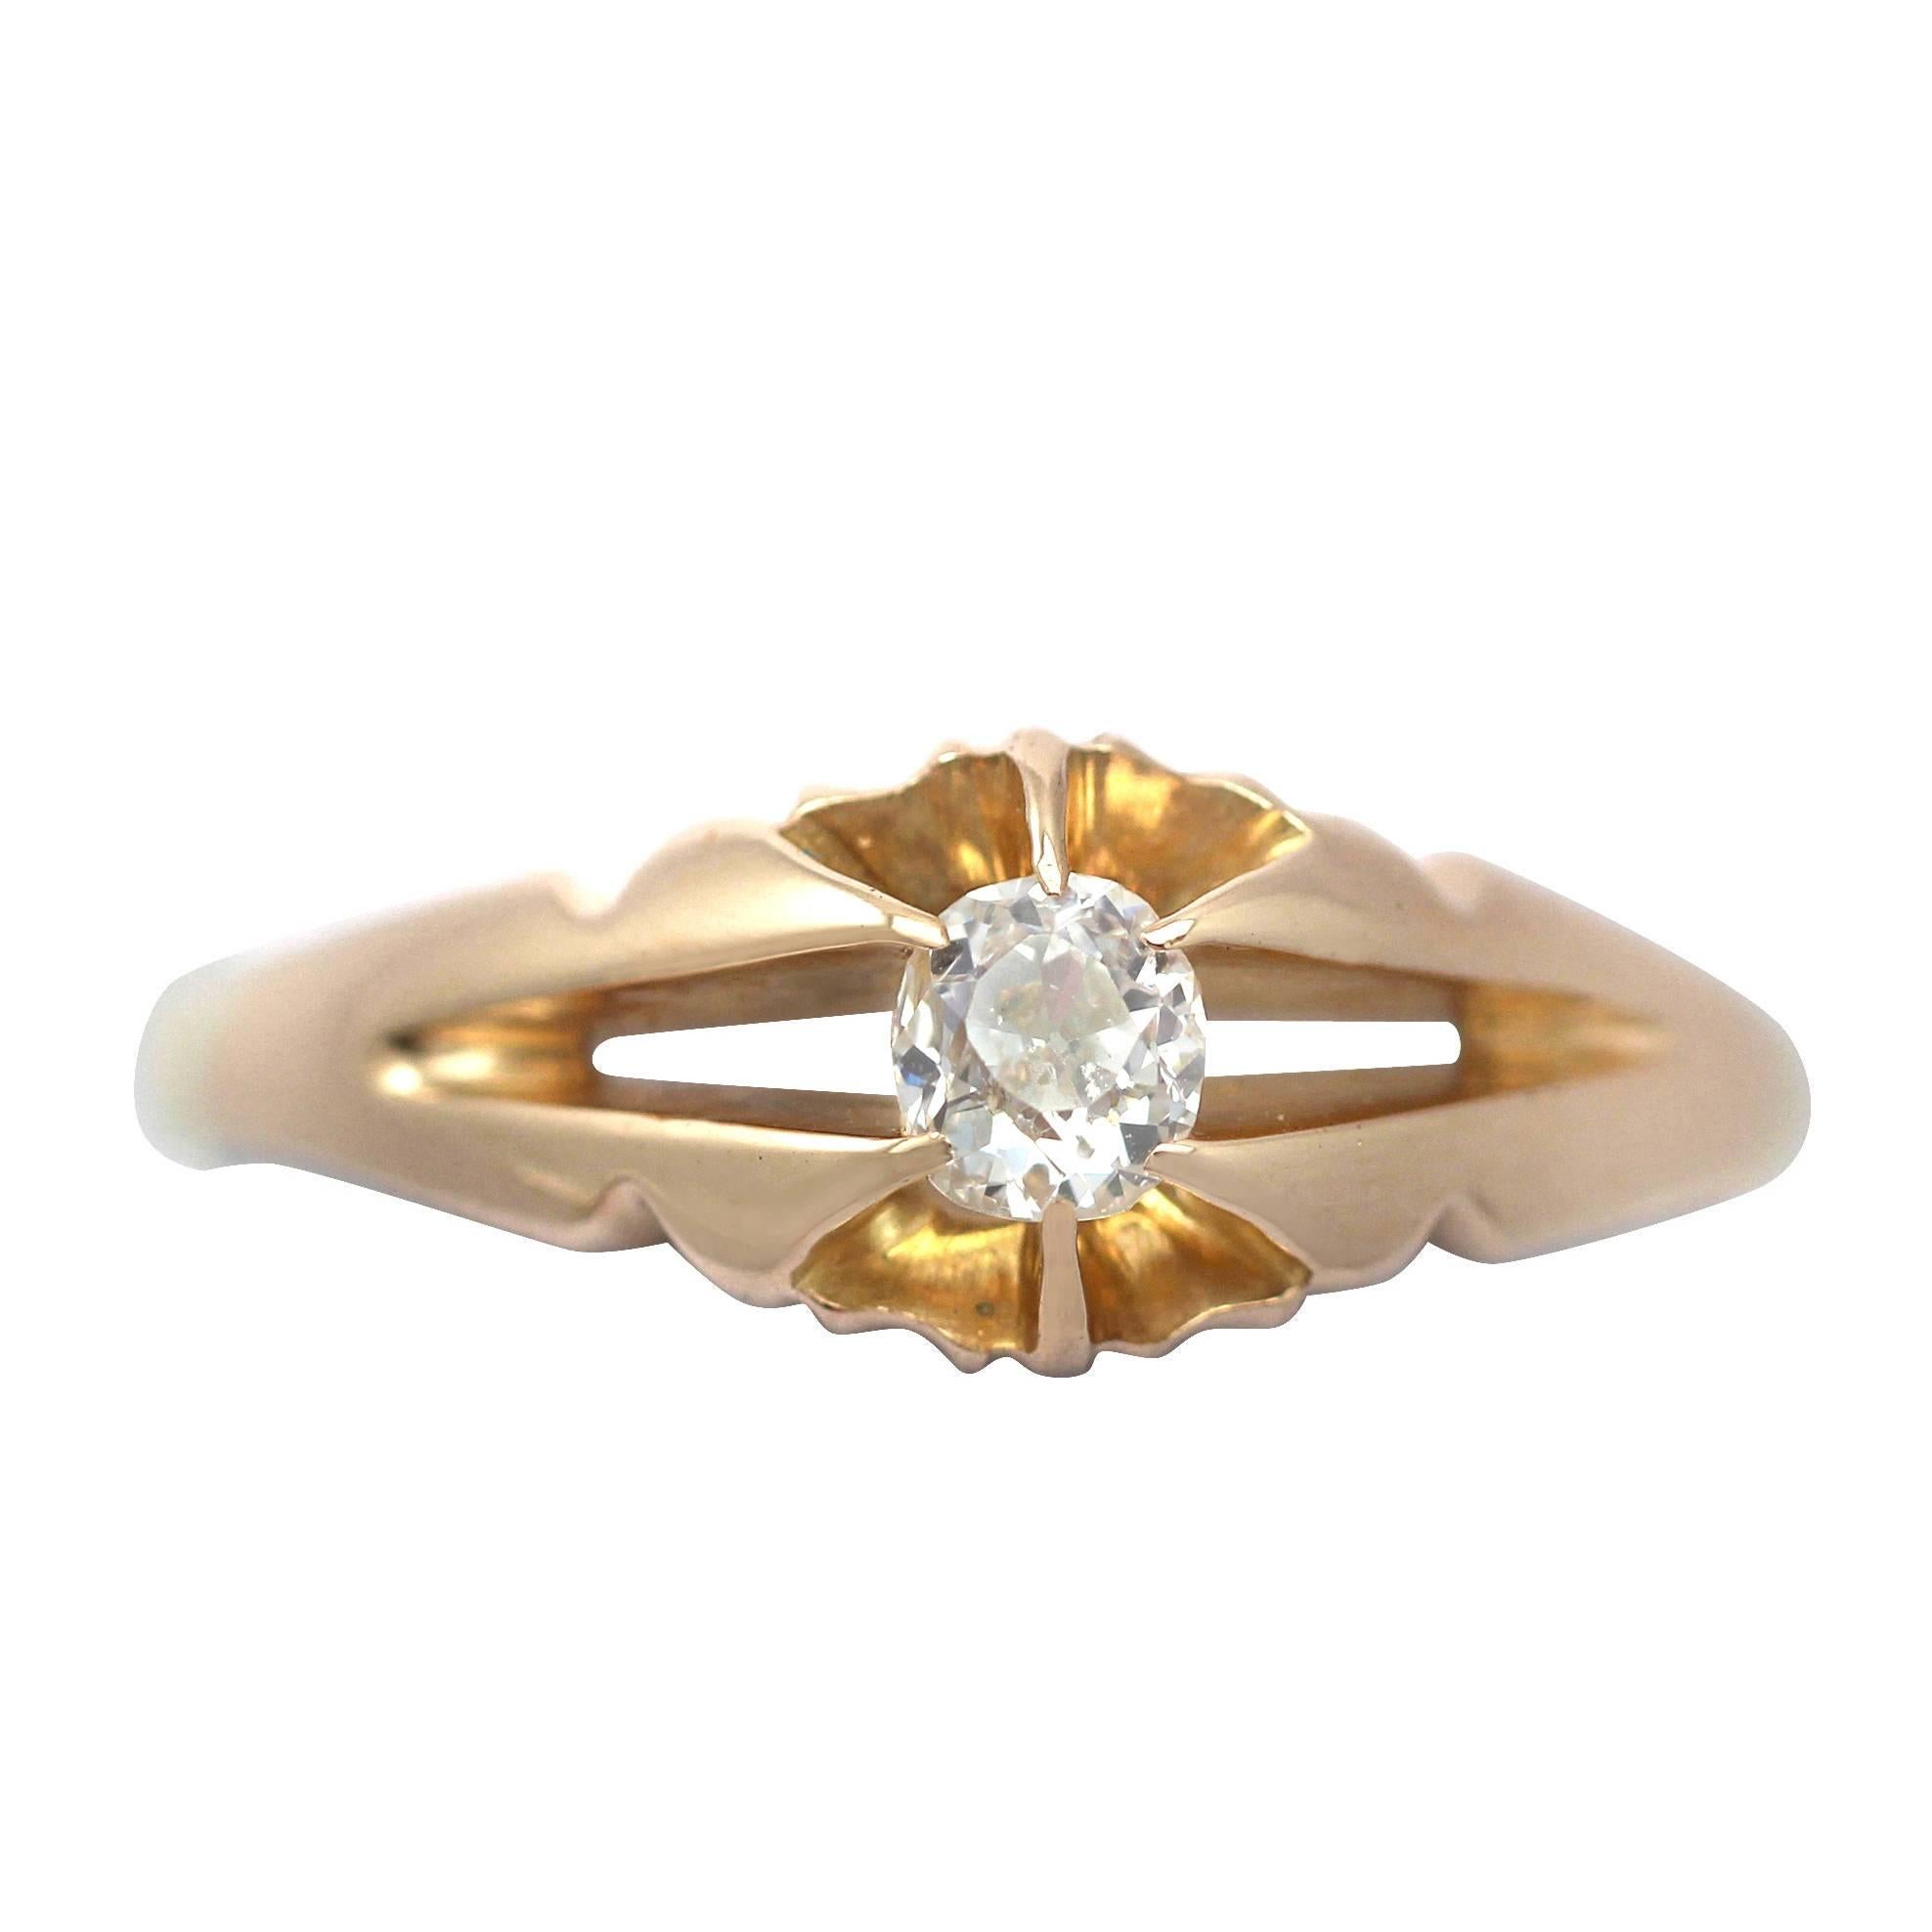 Diamond and 18k Yellow Gold Solitaire Ring, Antique, 1928